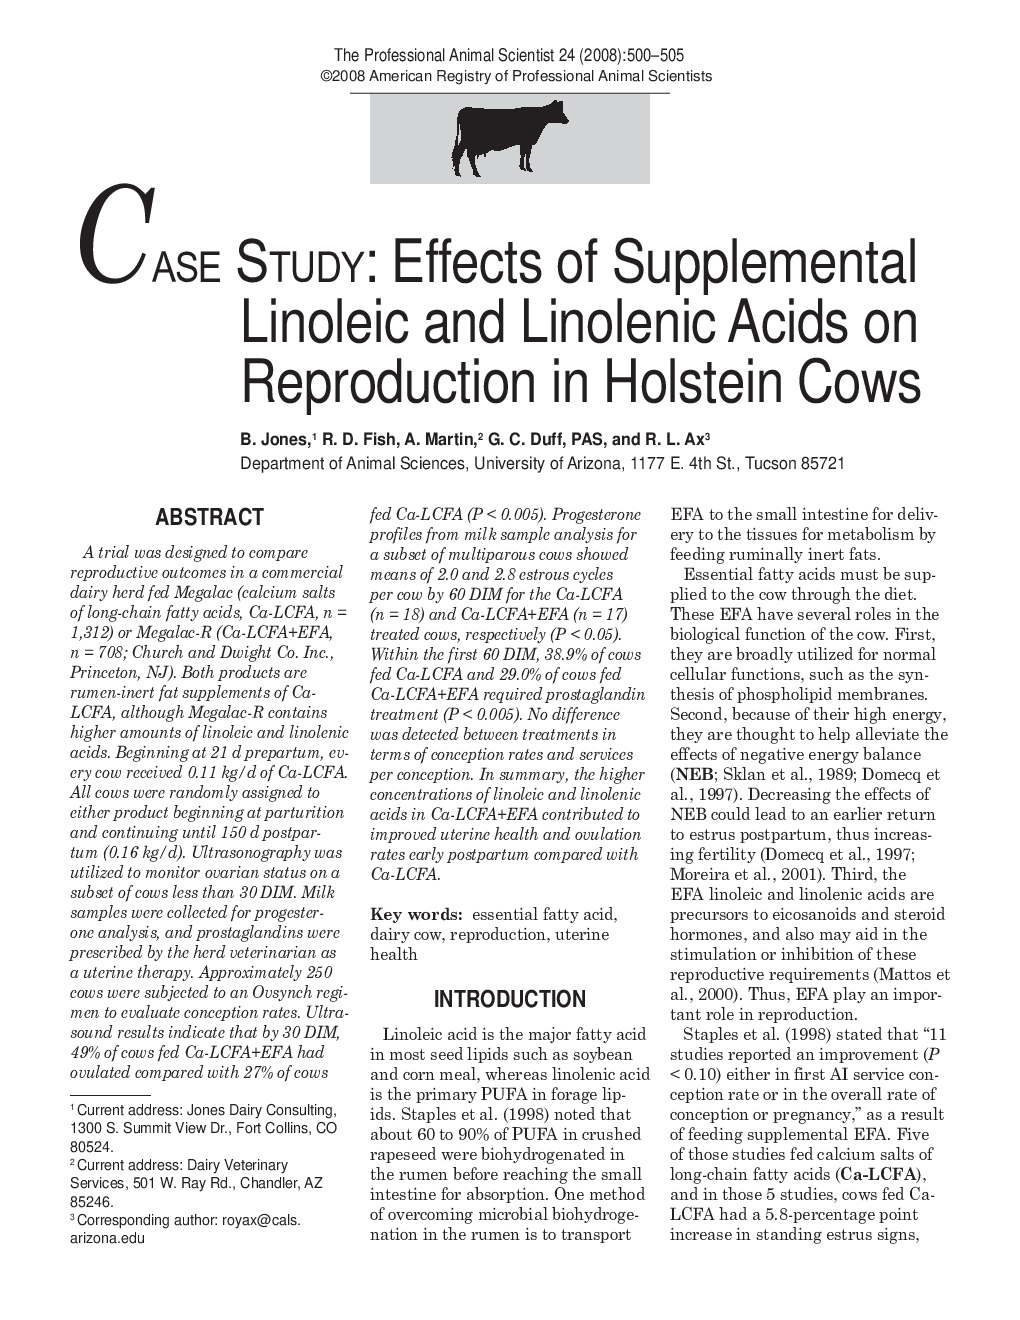 Case Study: Effects of Supplemental Linoleic and Linolenic Acids on Reproduction in Holstein Cows